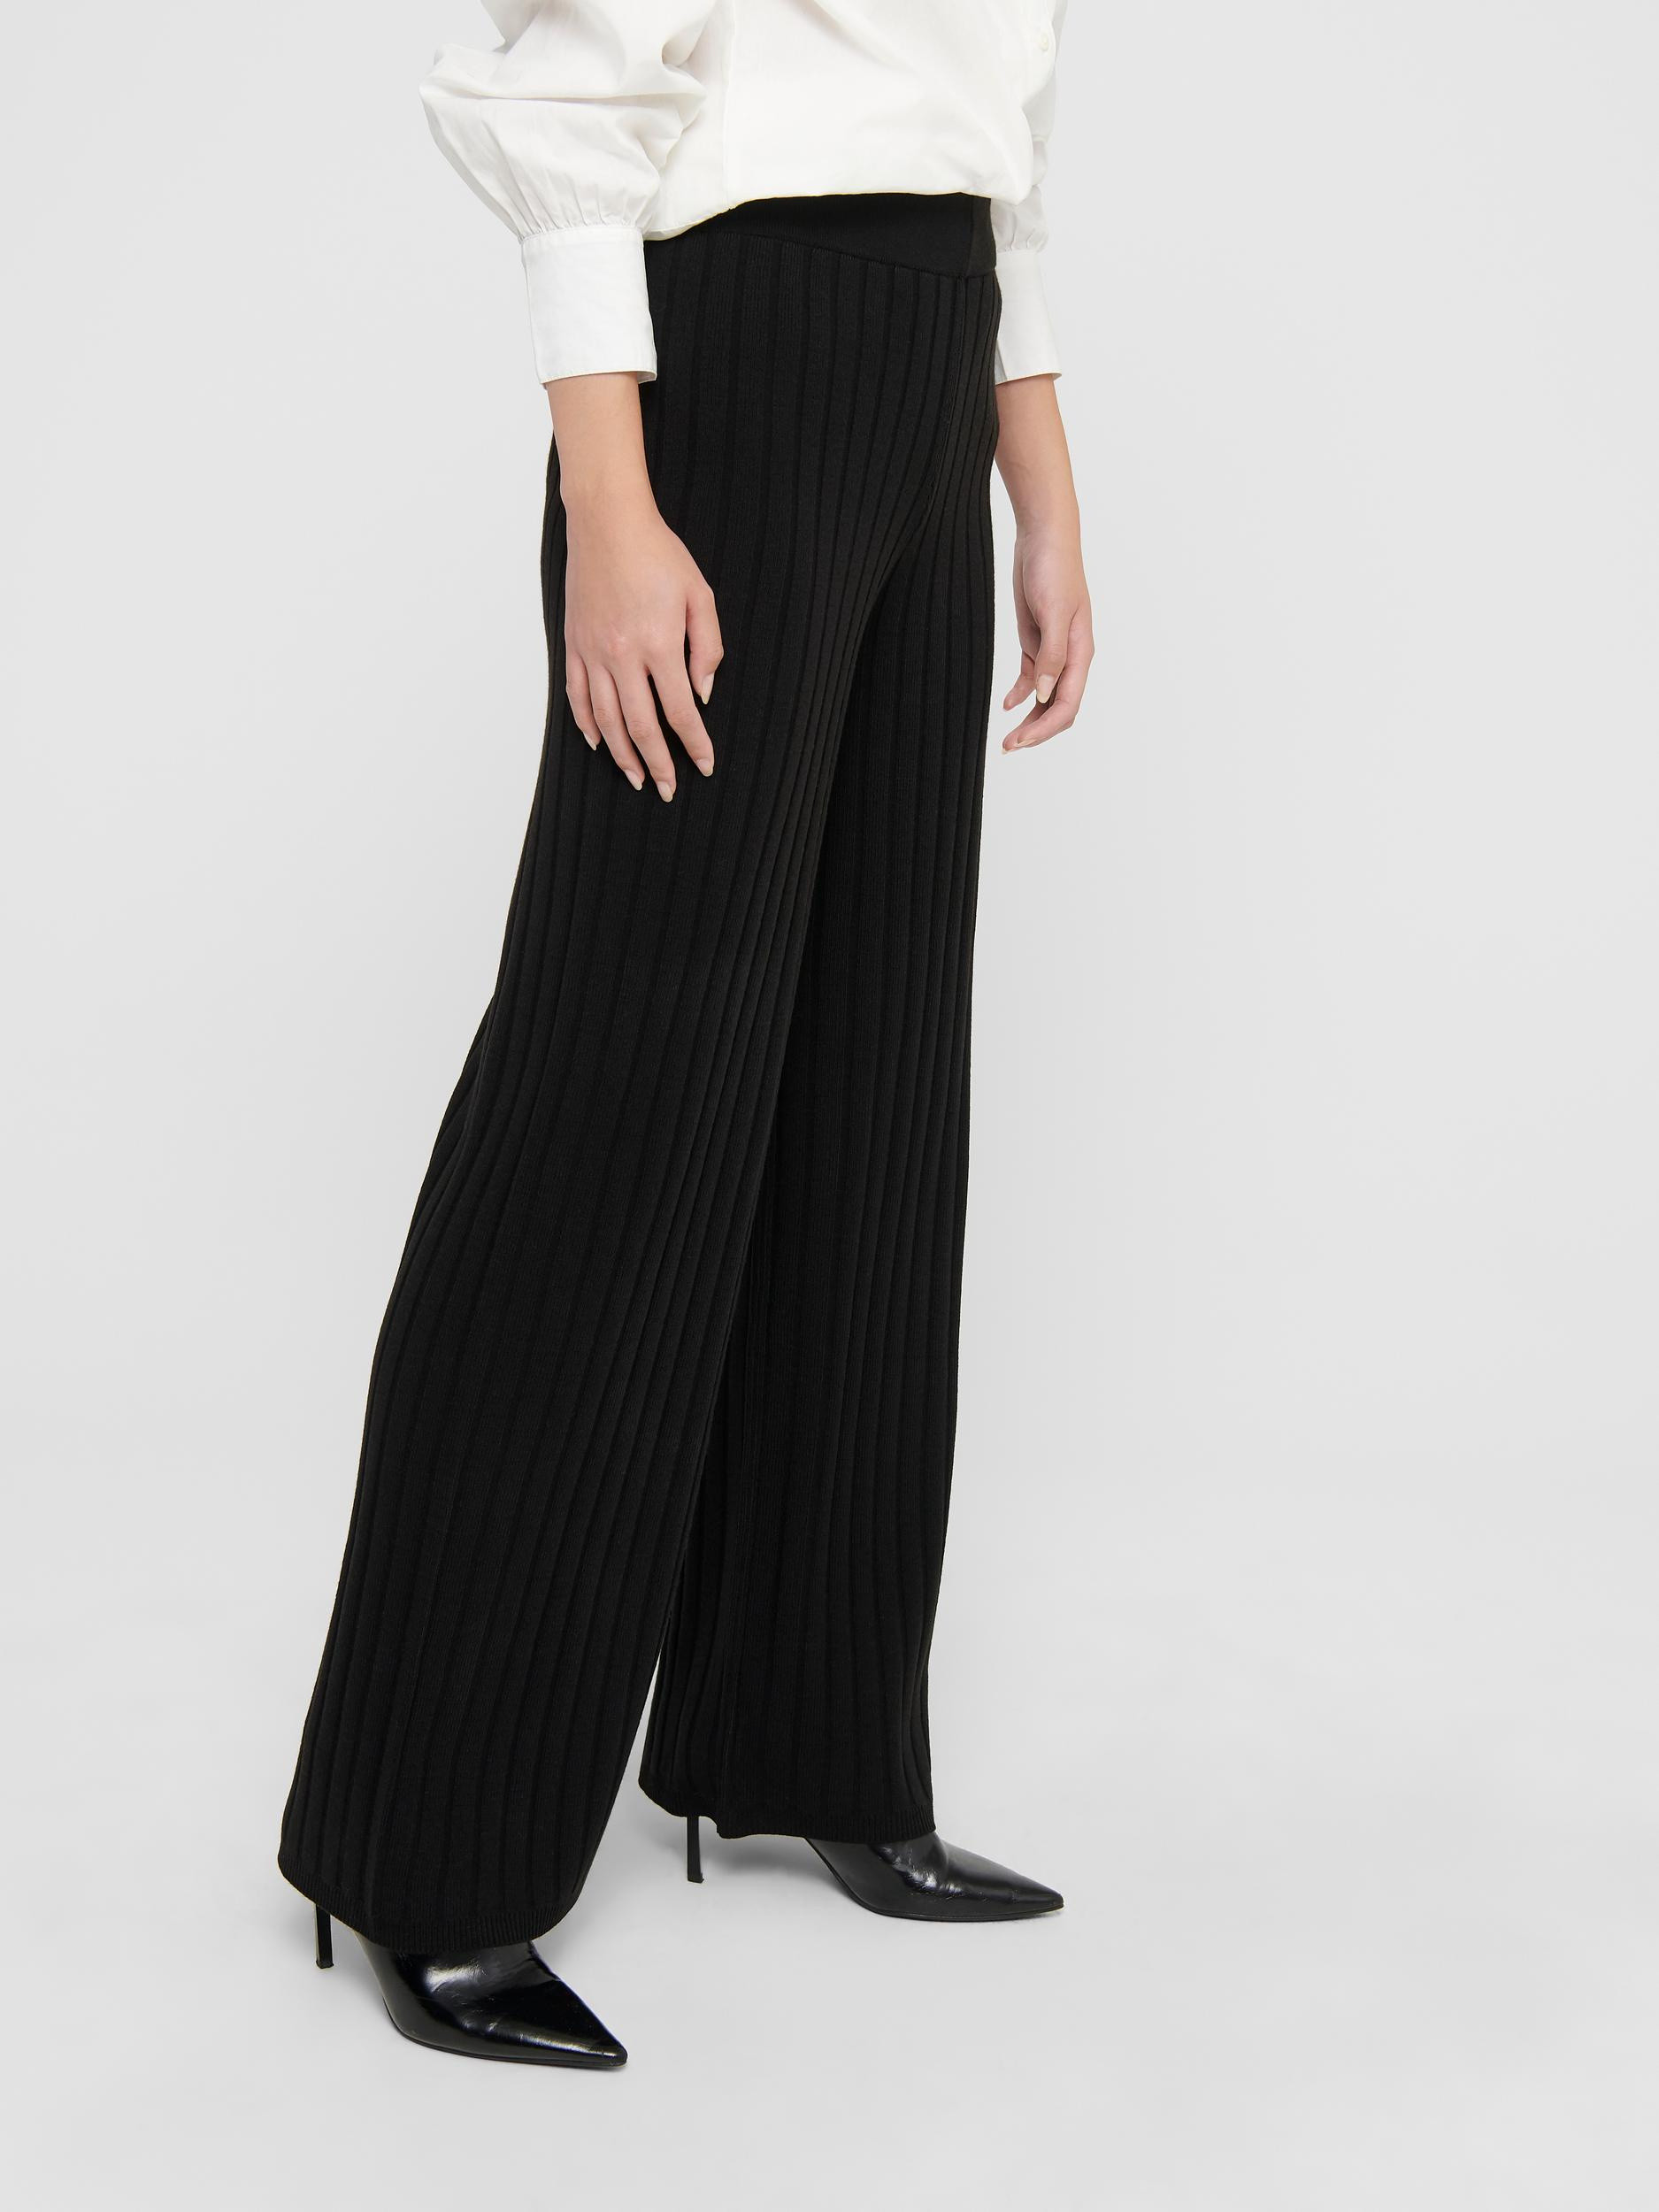 high-waisted trousers, Black, large image number 3